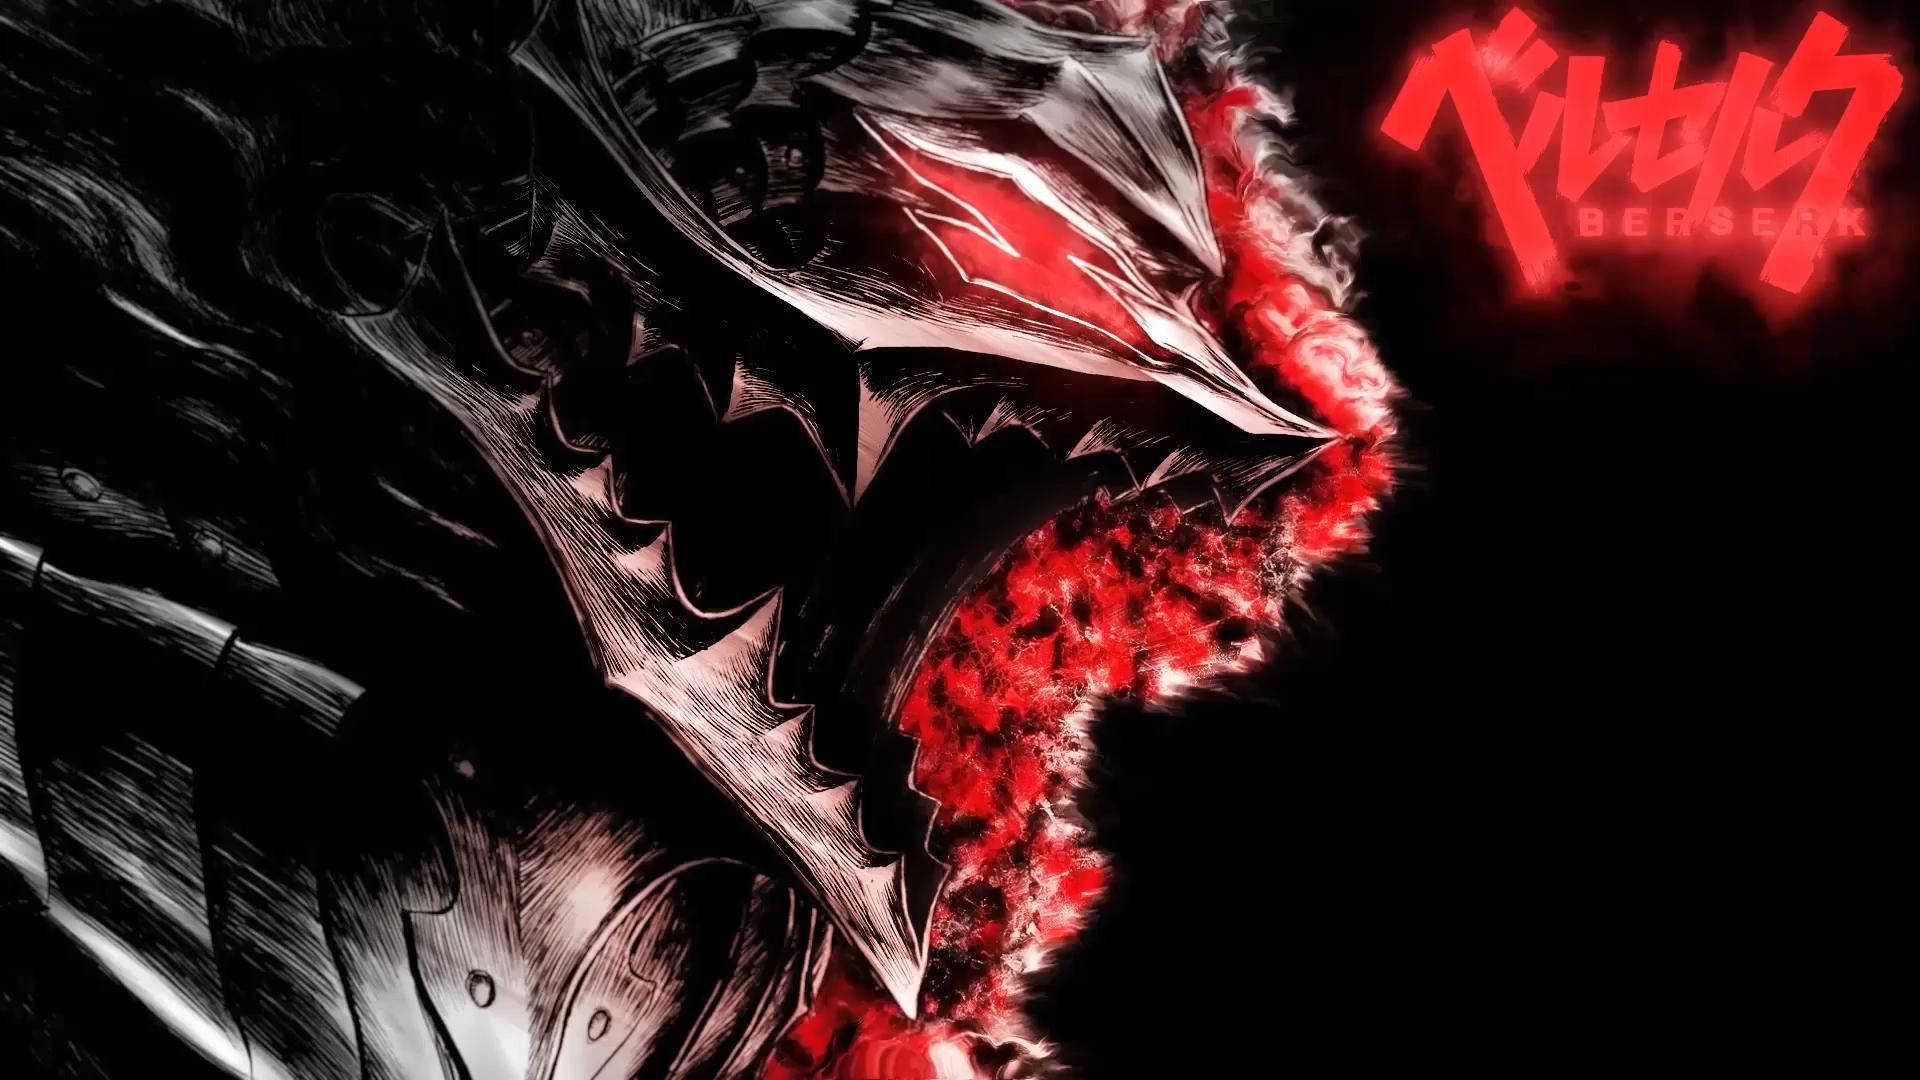 Guts and Griffith, lethal adversaries in the anime series Berserk Wallpaper